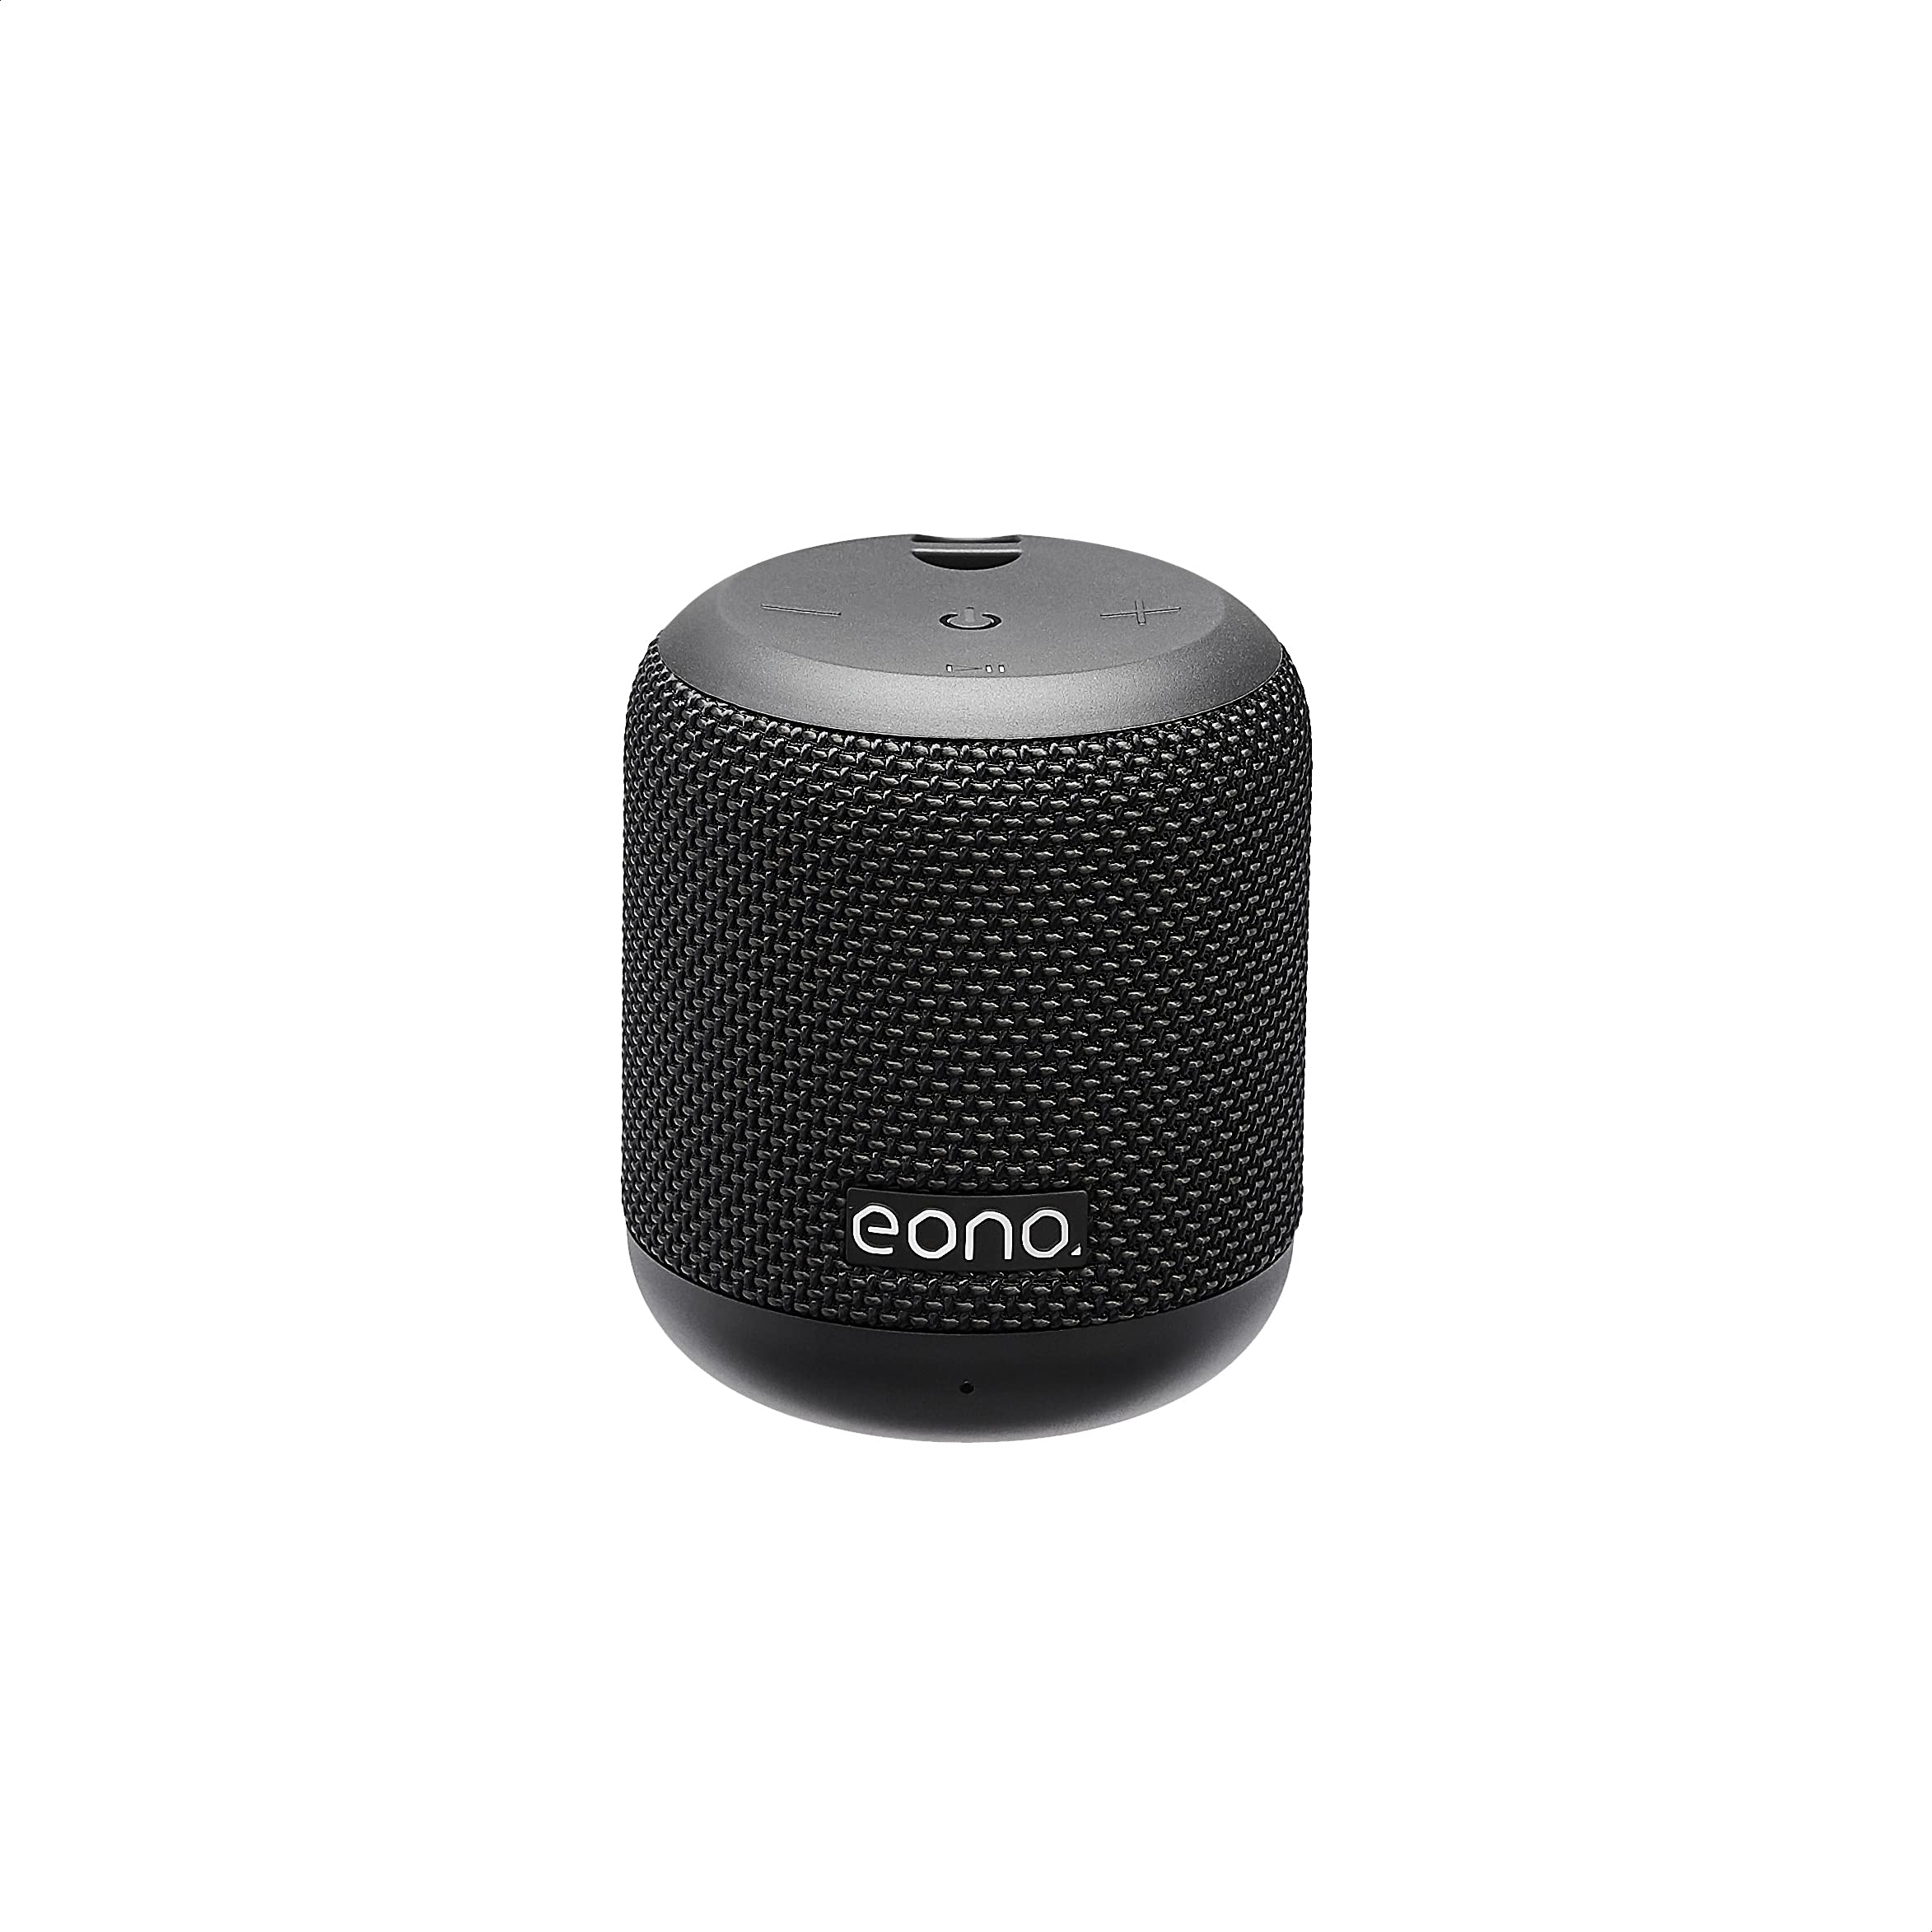 Eono by Amazon - Bluetooth IPX5 Waterproof Speaker with HARMAN Sound Technology, 9 Hours of Playtime, Deep Bass Sound, Siri and Google Compatible, Built-In Microphone